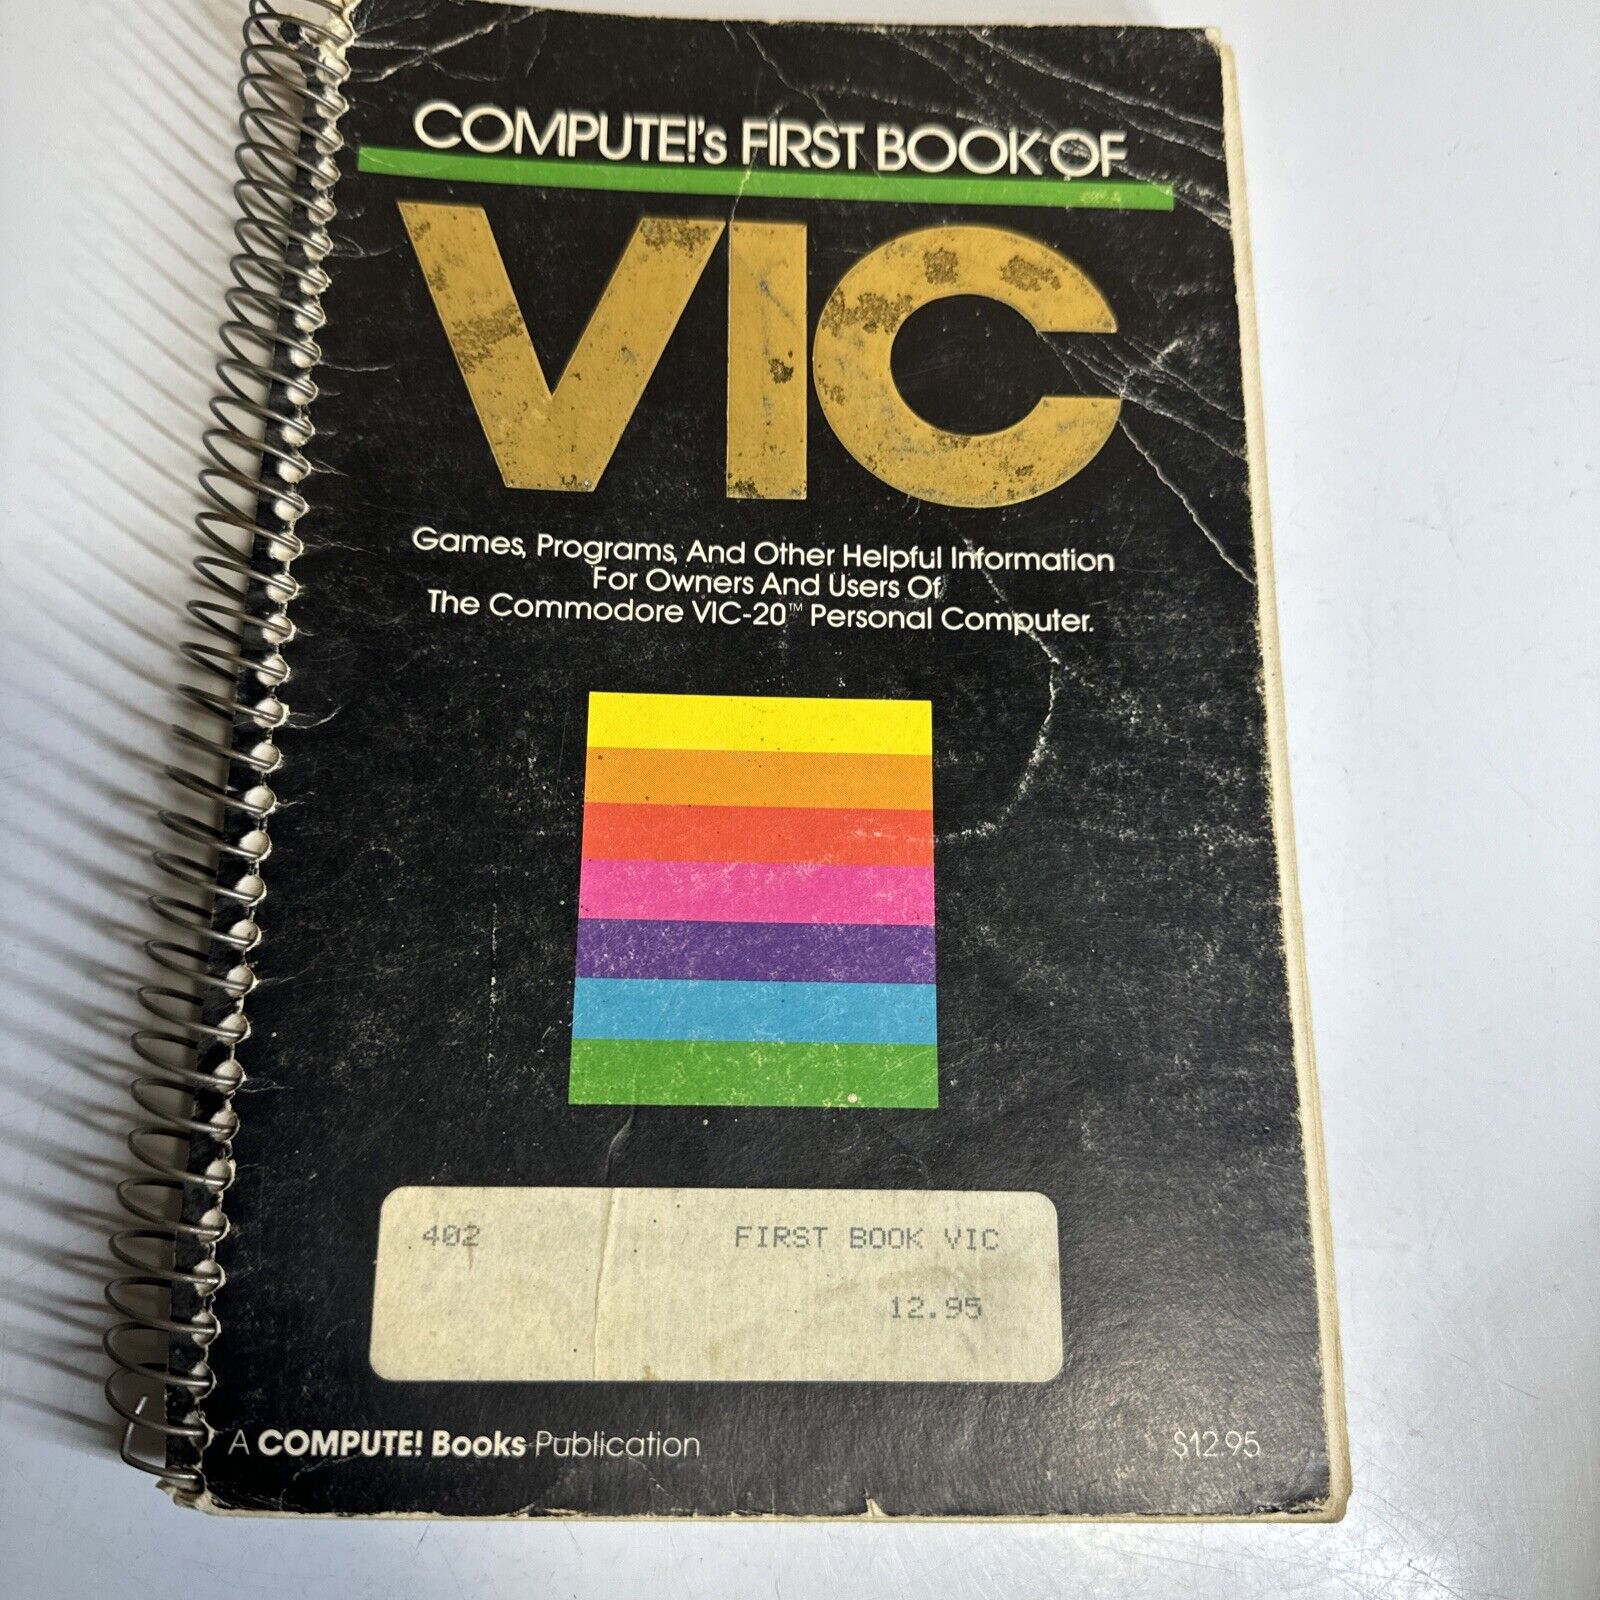 1982 Compute First Book Of Commodore VIC